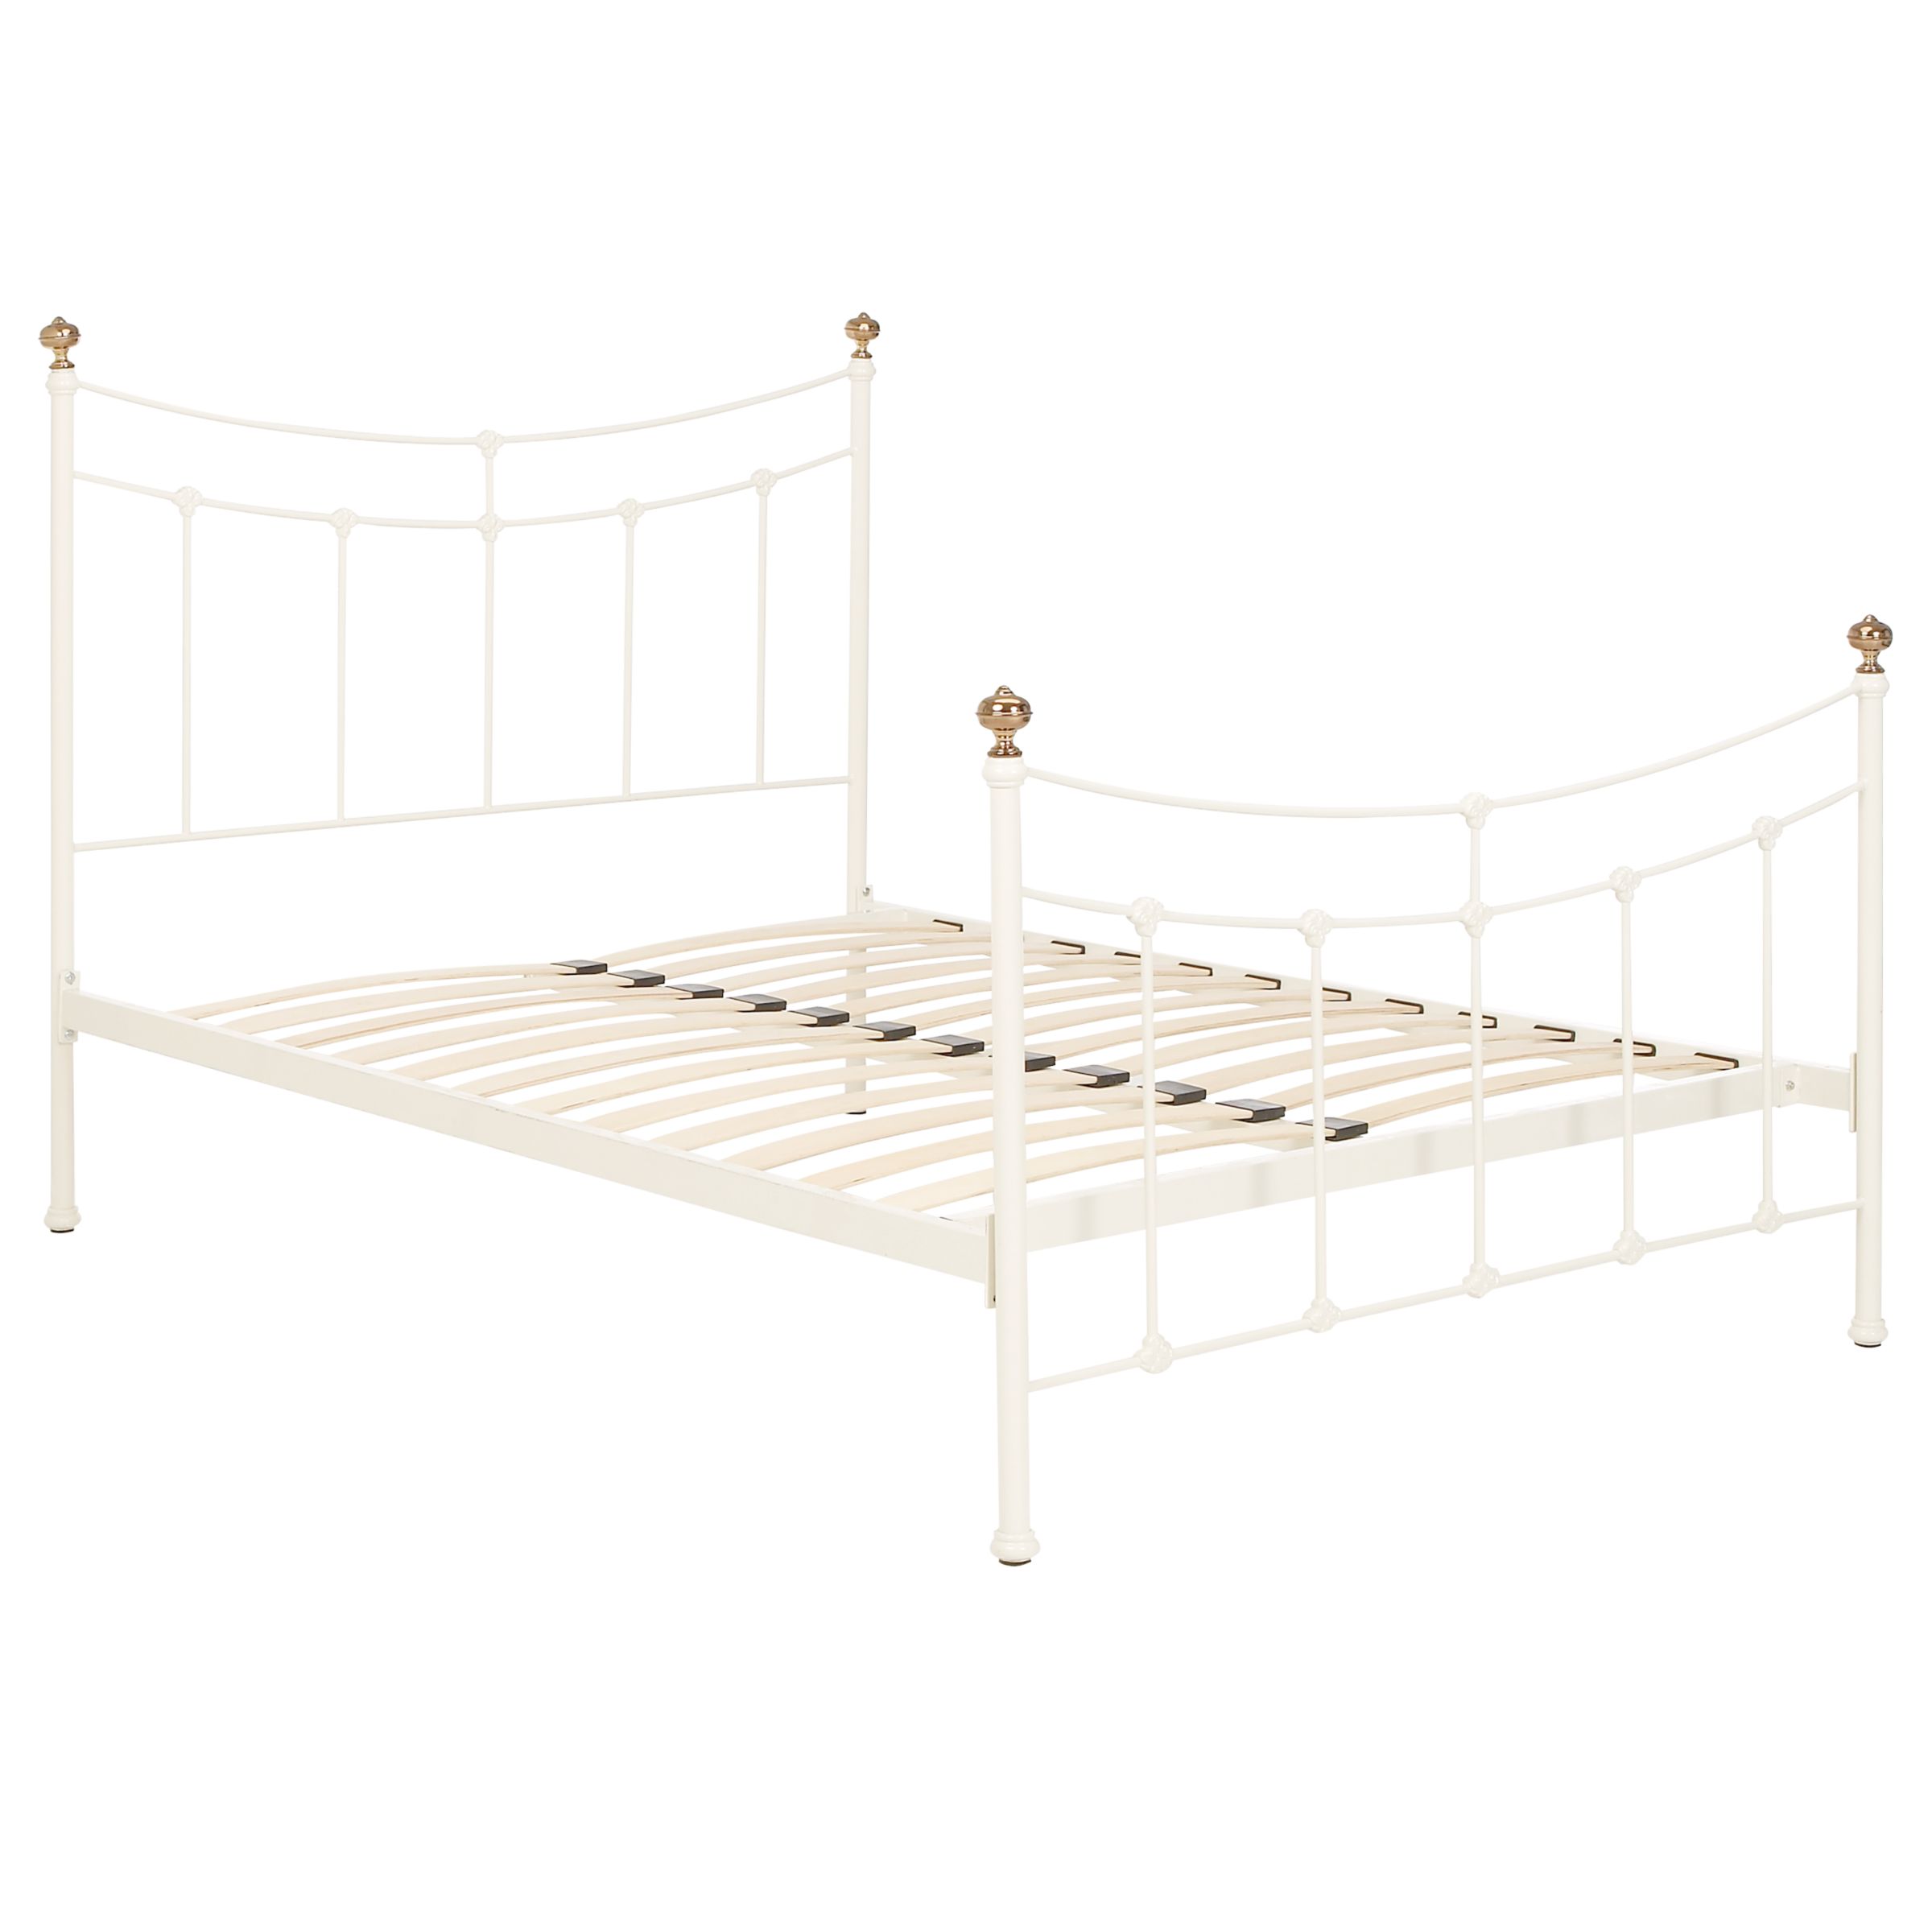 John Lewis Lucy Bedstead, Double at JohnLewis